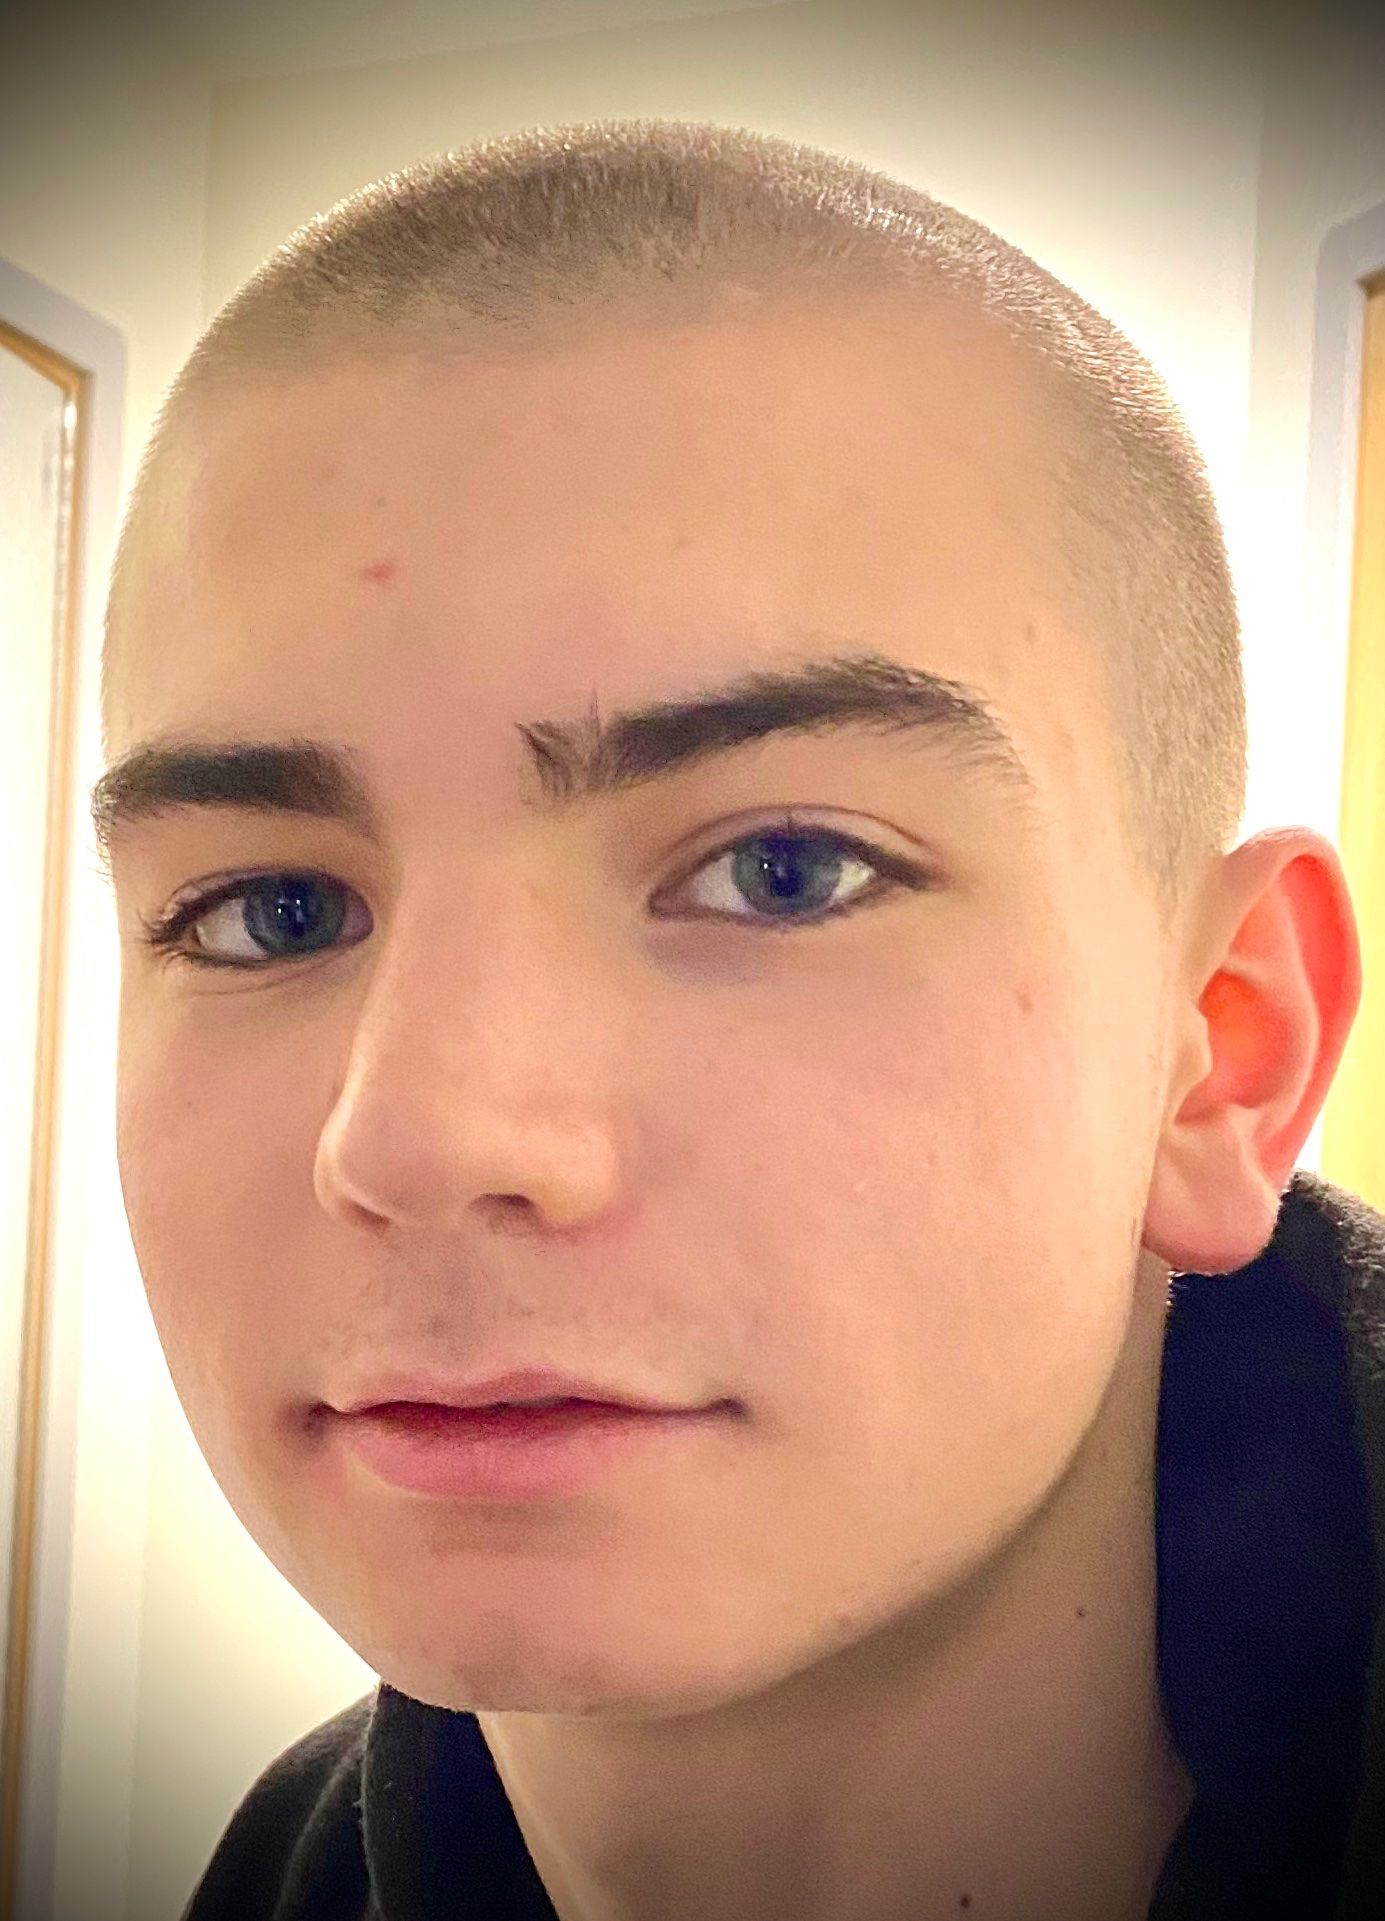 Sinead O’Connor’s son dies at 17 after going missing for 2 days